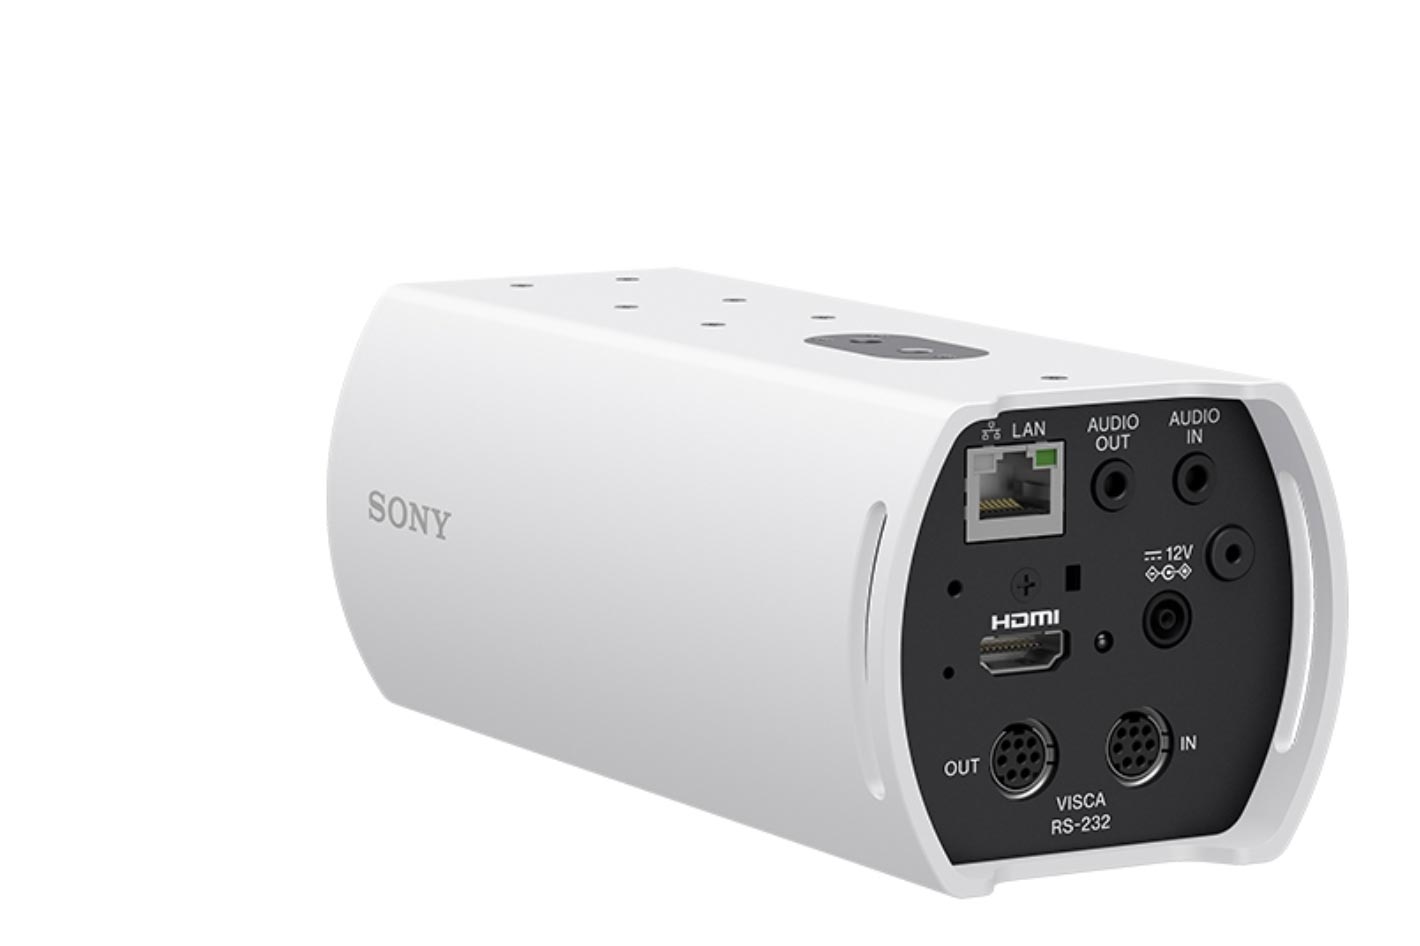 Sony expands remote camera line-up with SRG-XP1 and SRG-XB25